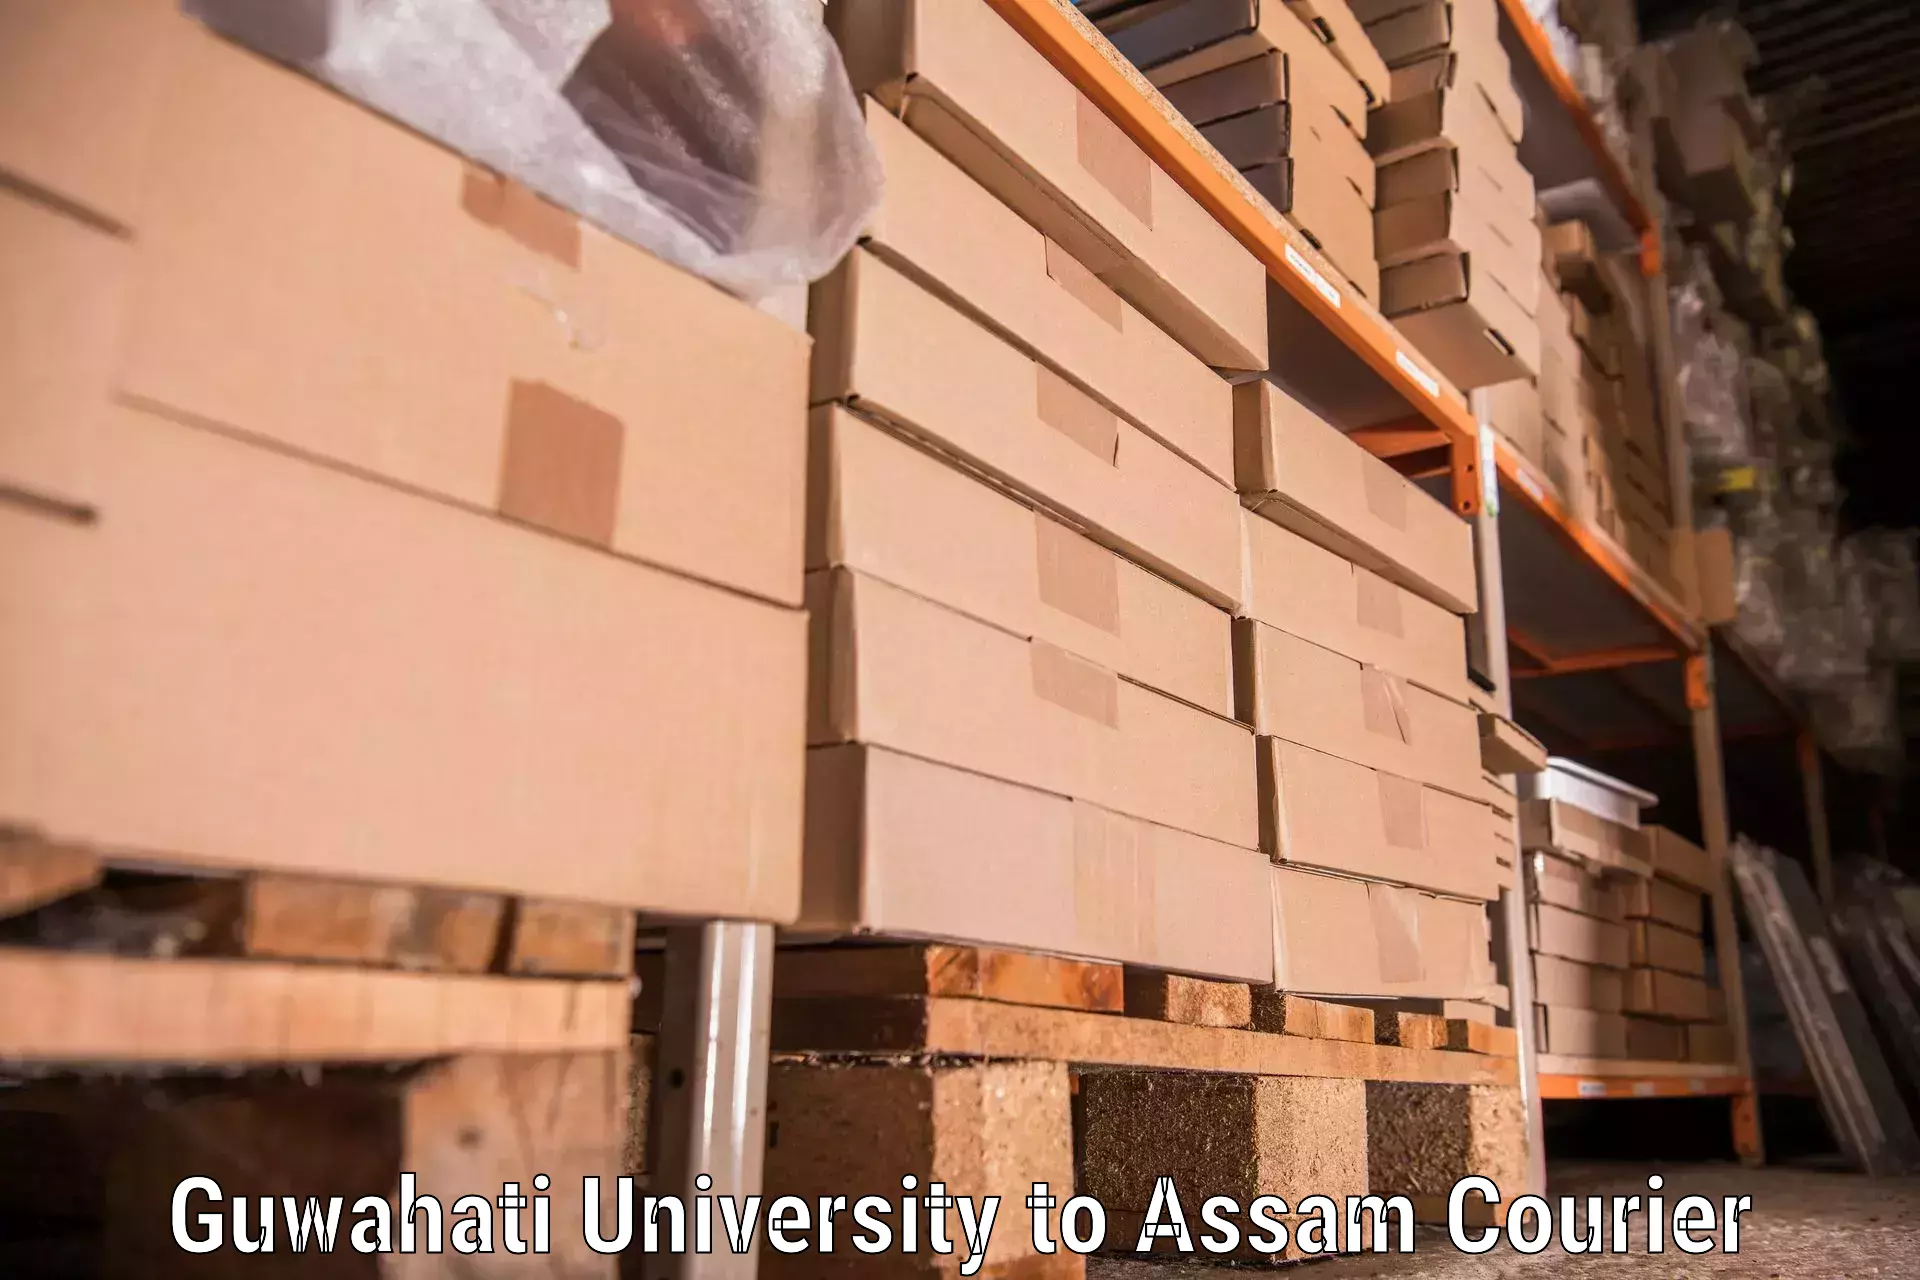 Budget-friendly moving services Guwahati University to Darrang